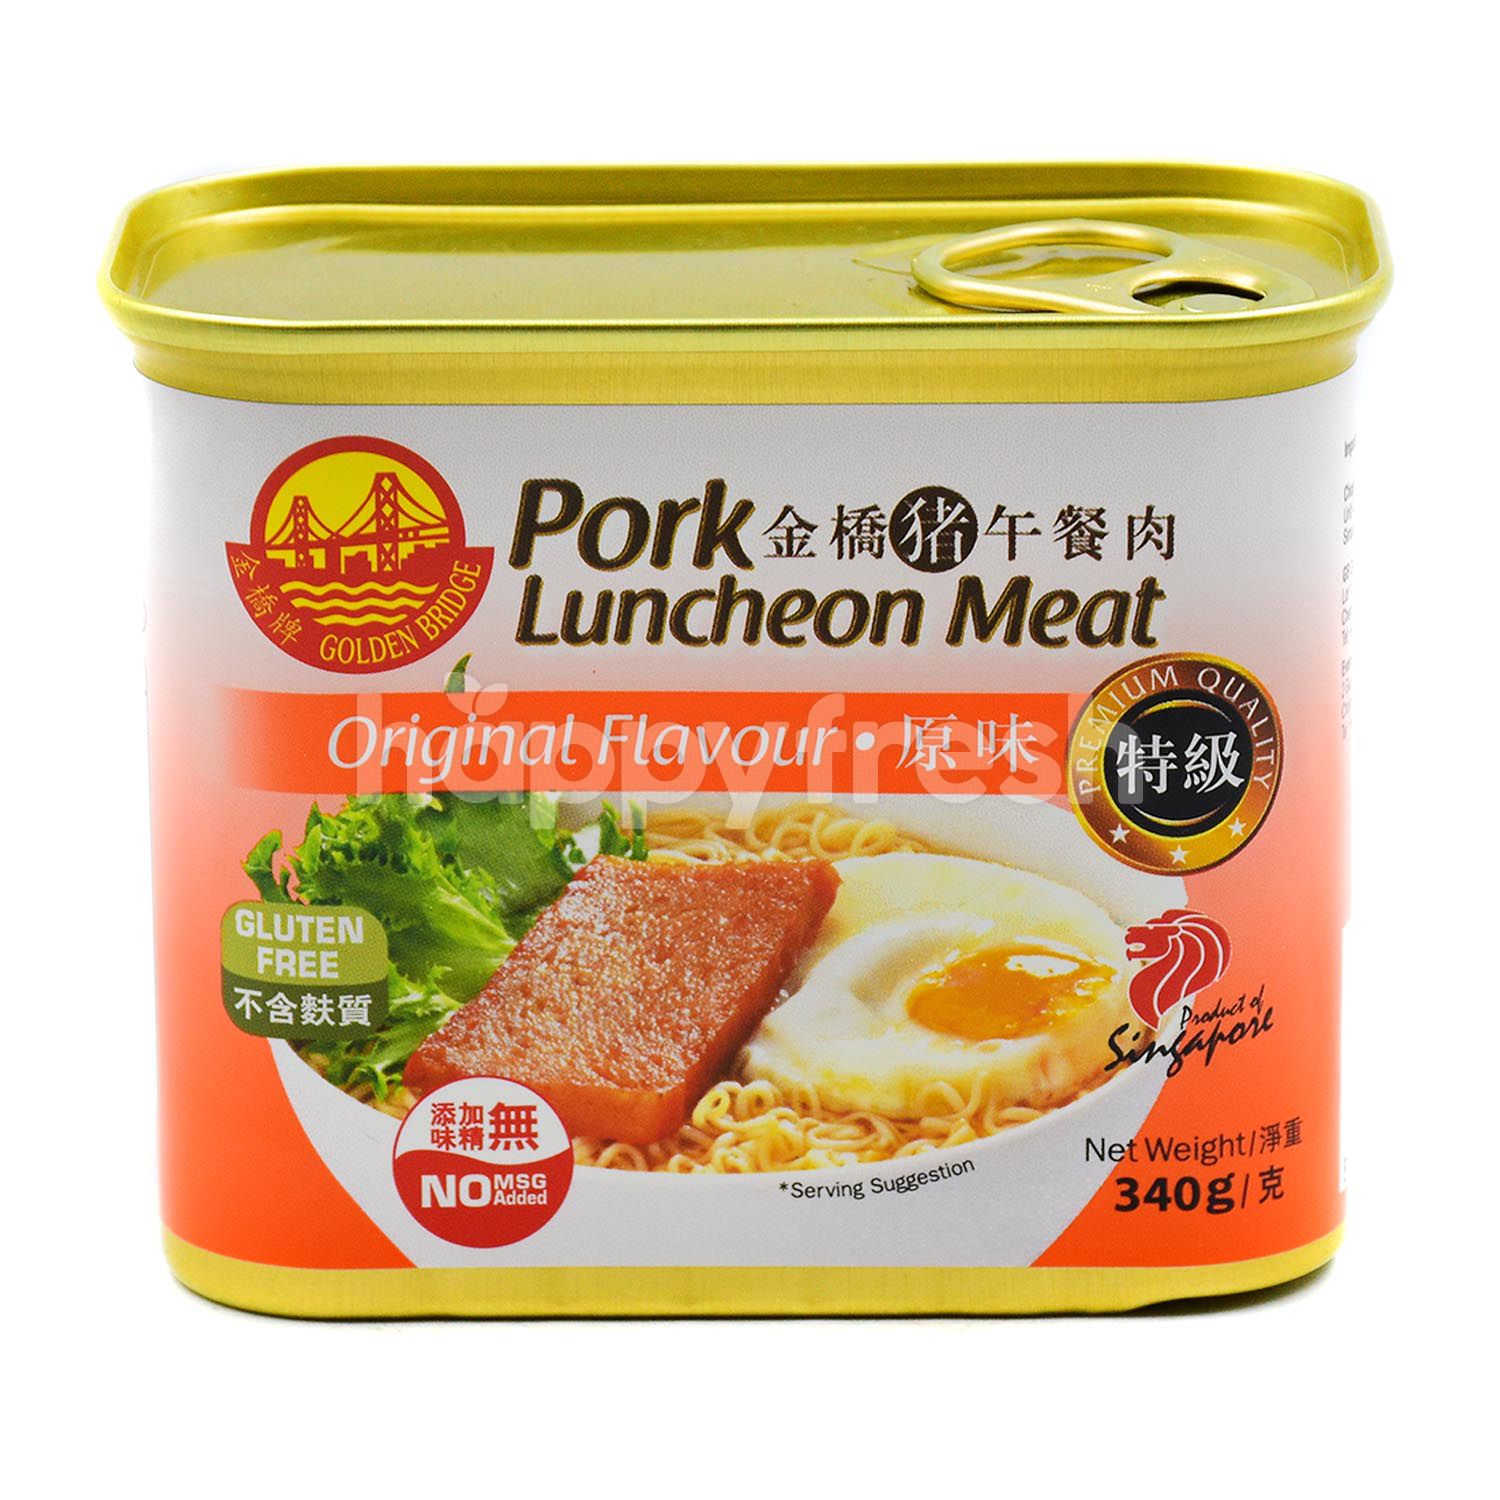 Luncheon meat консервы. Luncheon meat китайский. Luncheon meat консервы ingredients. Chicken Luncheon meat. Made for meat